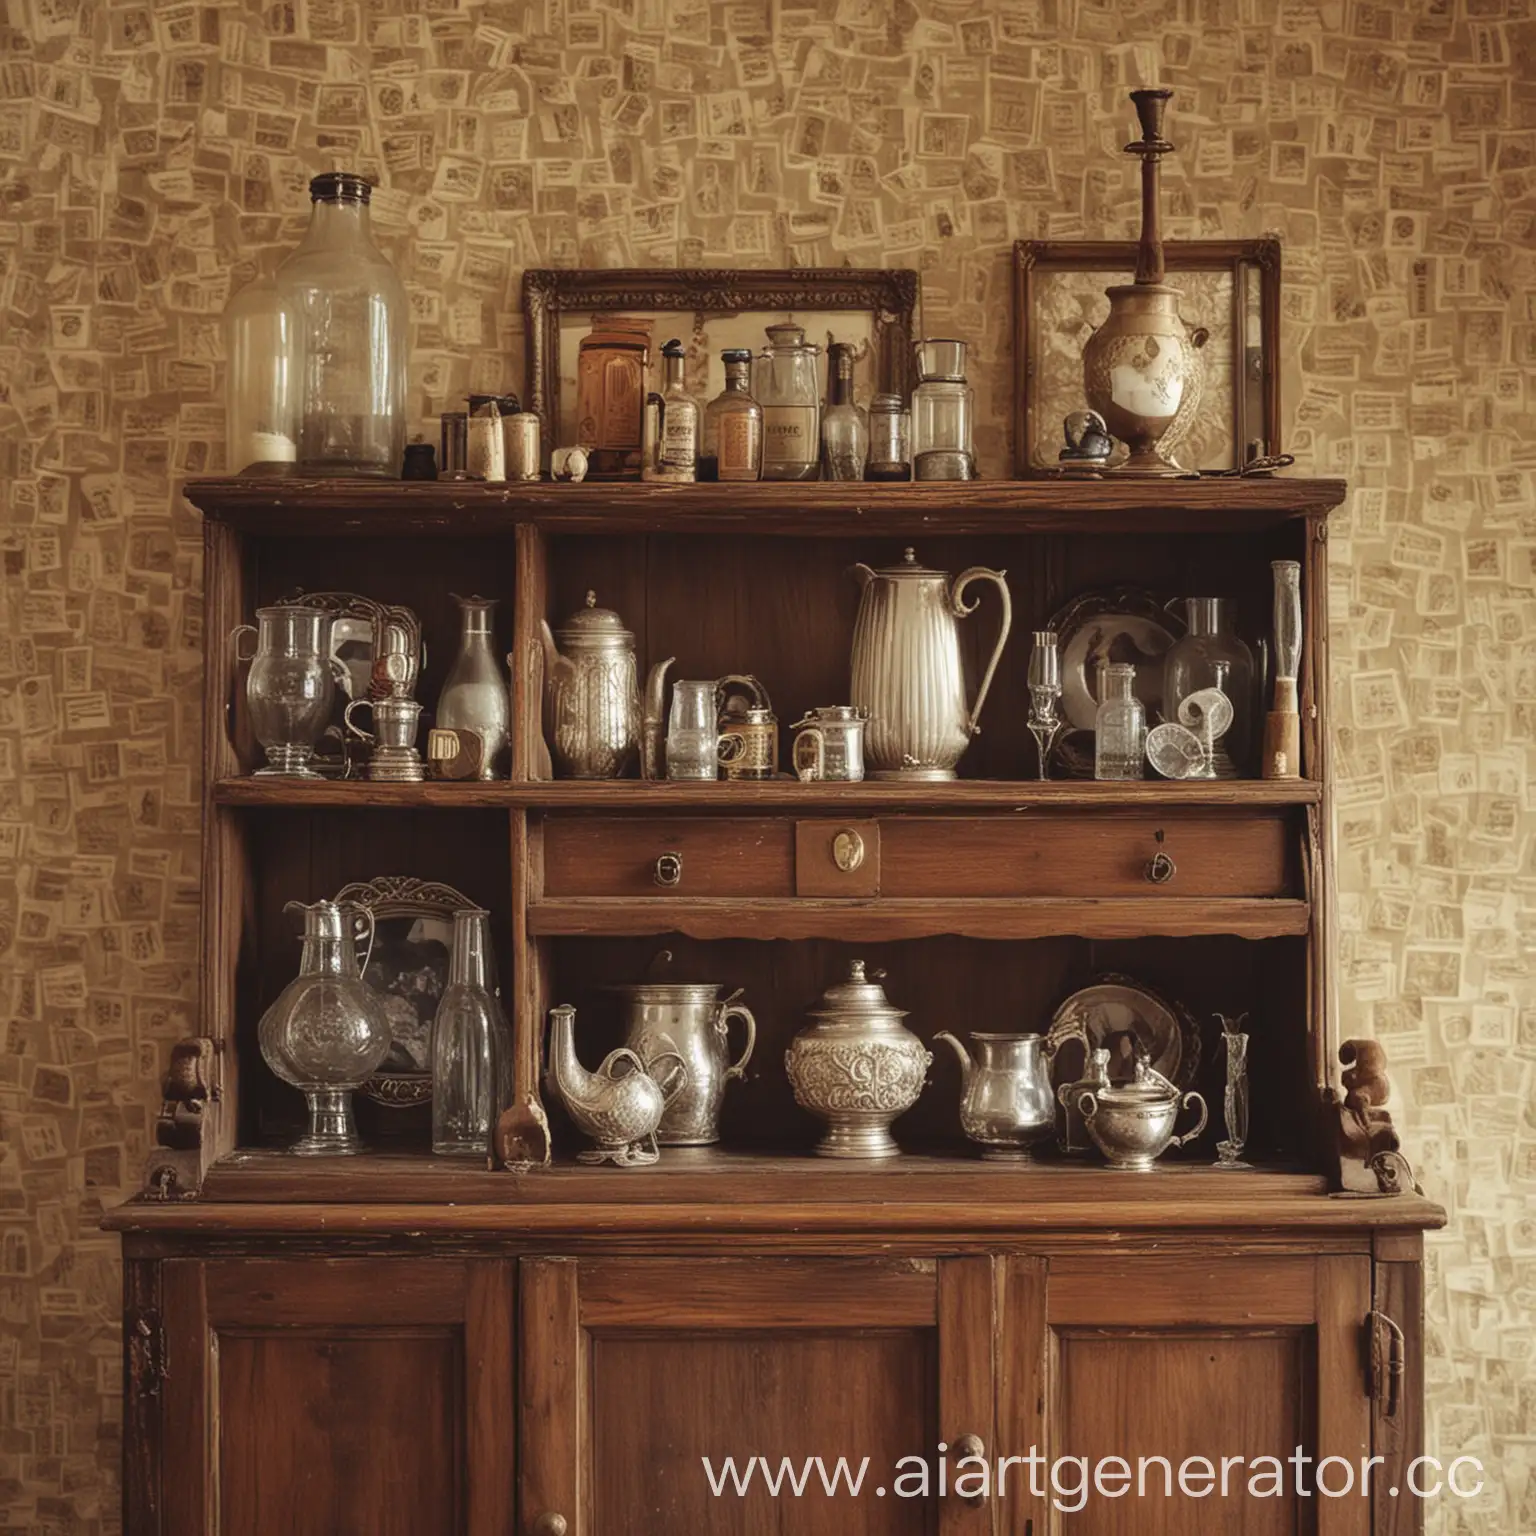 Charming-Vintage-Home-Decor-with-Antique-Items